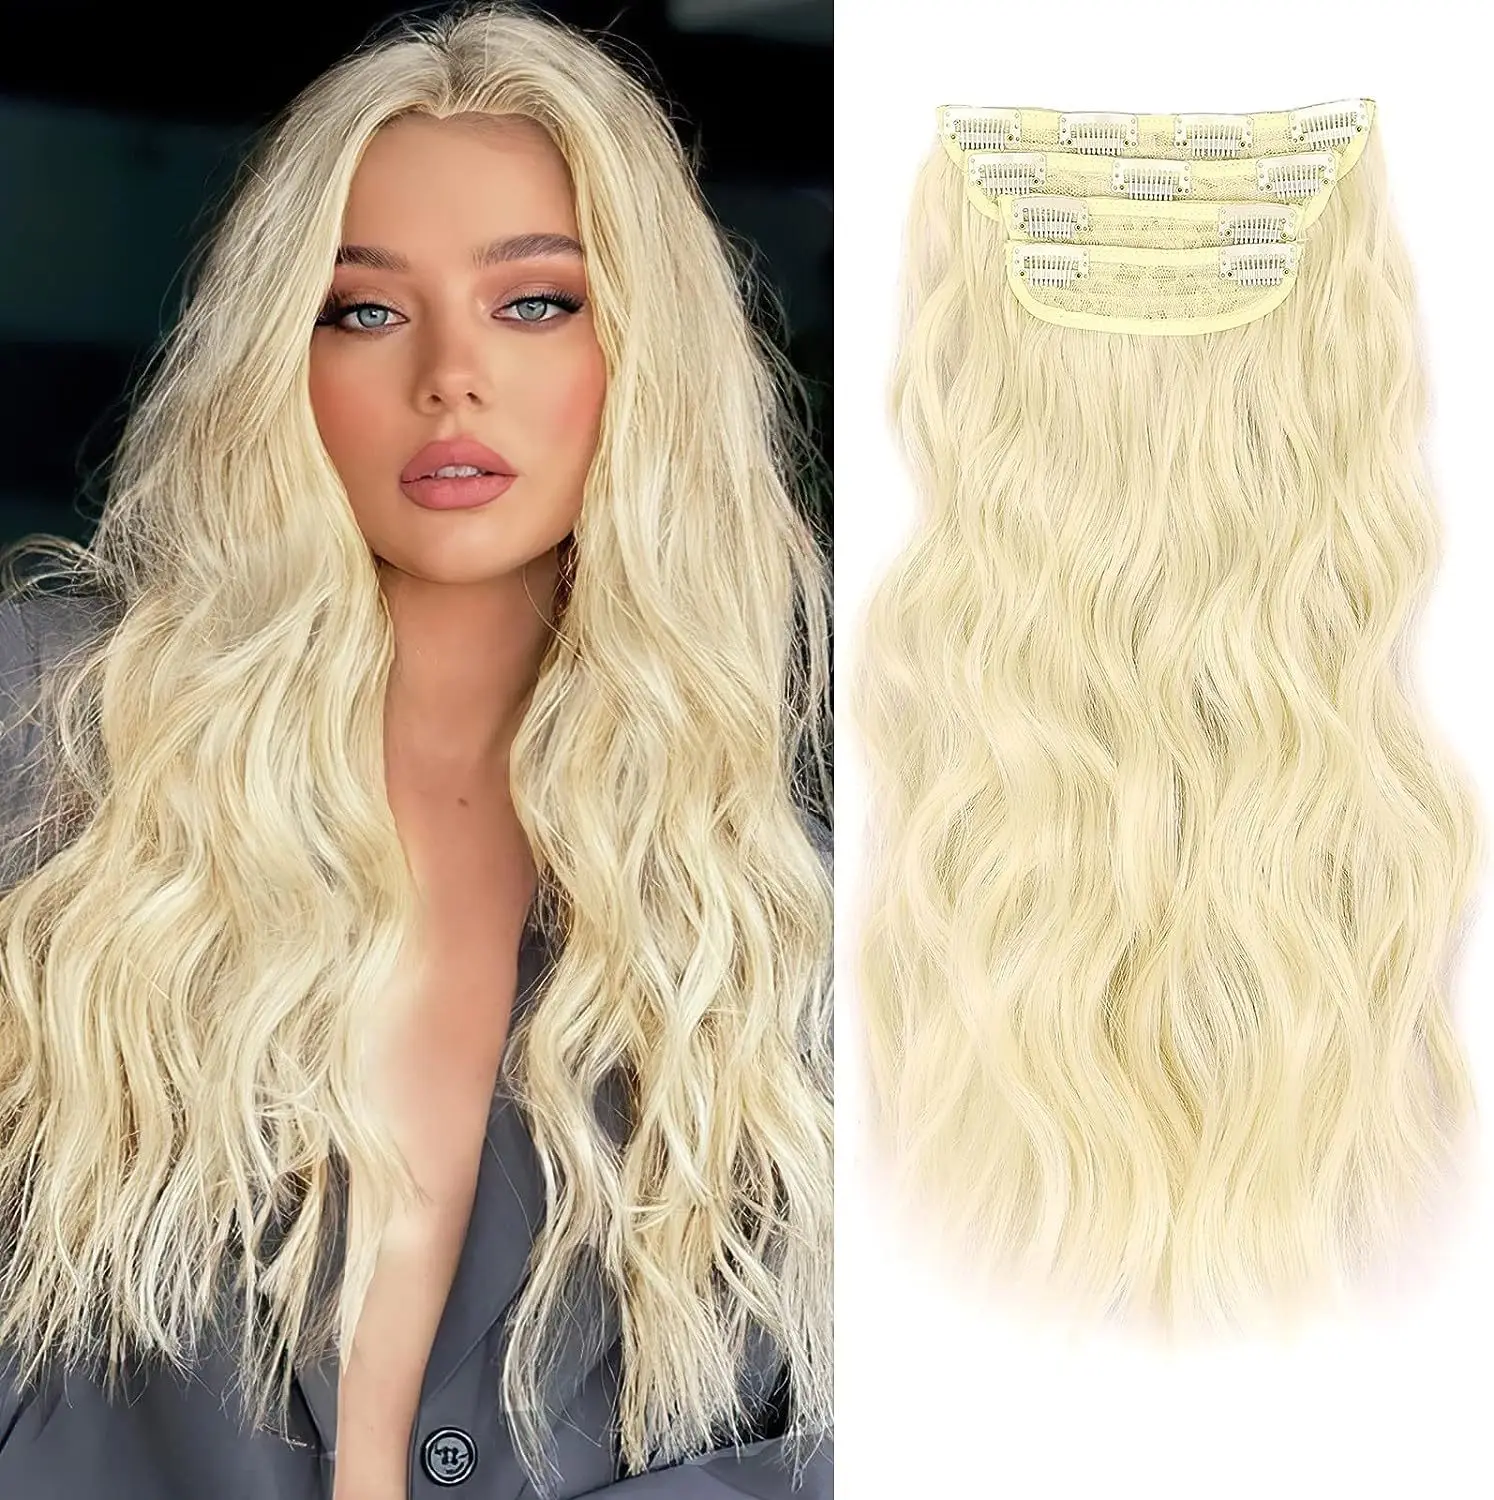 4PCS Clips in Hair Extensions 11Clips 180g Thick Hair Honey Blonde Mixed Light Brown 20 Inch Long Wavy Synthetic Hair Extensions be hair be color 12 minute light blonde ash краска для волос тон 8 1 светлый блондин пепельный 100 мл